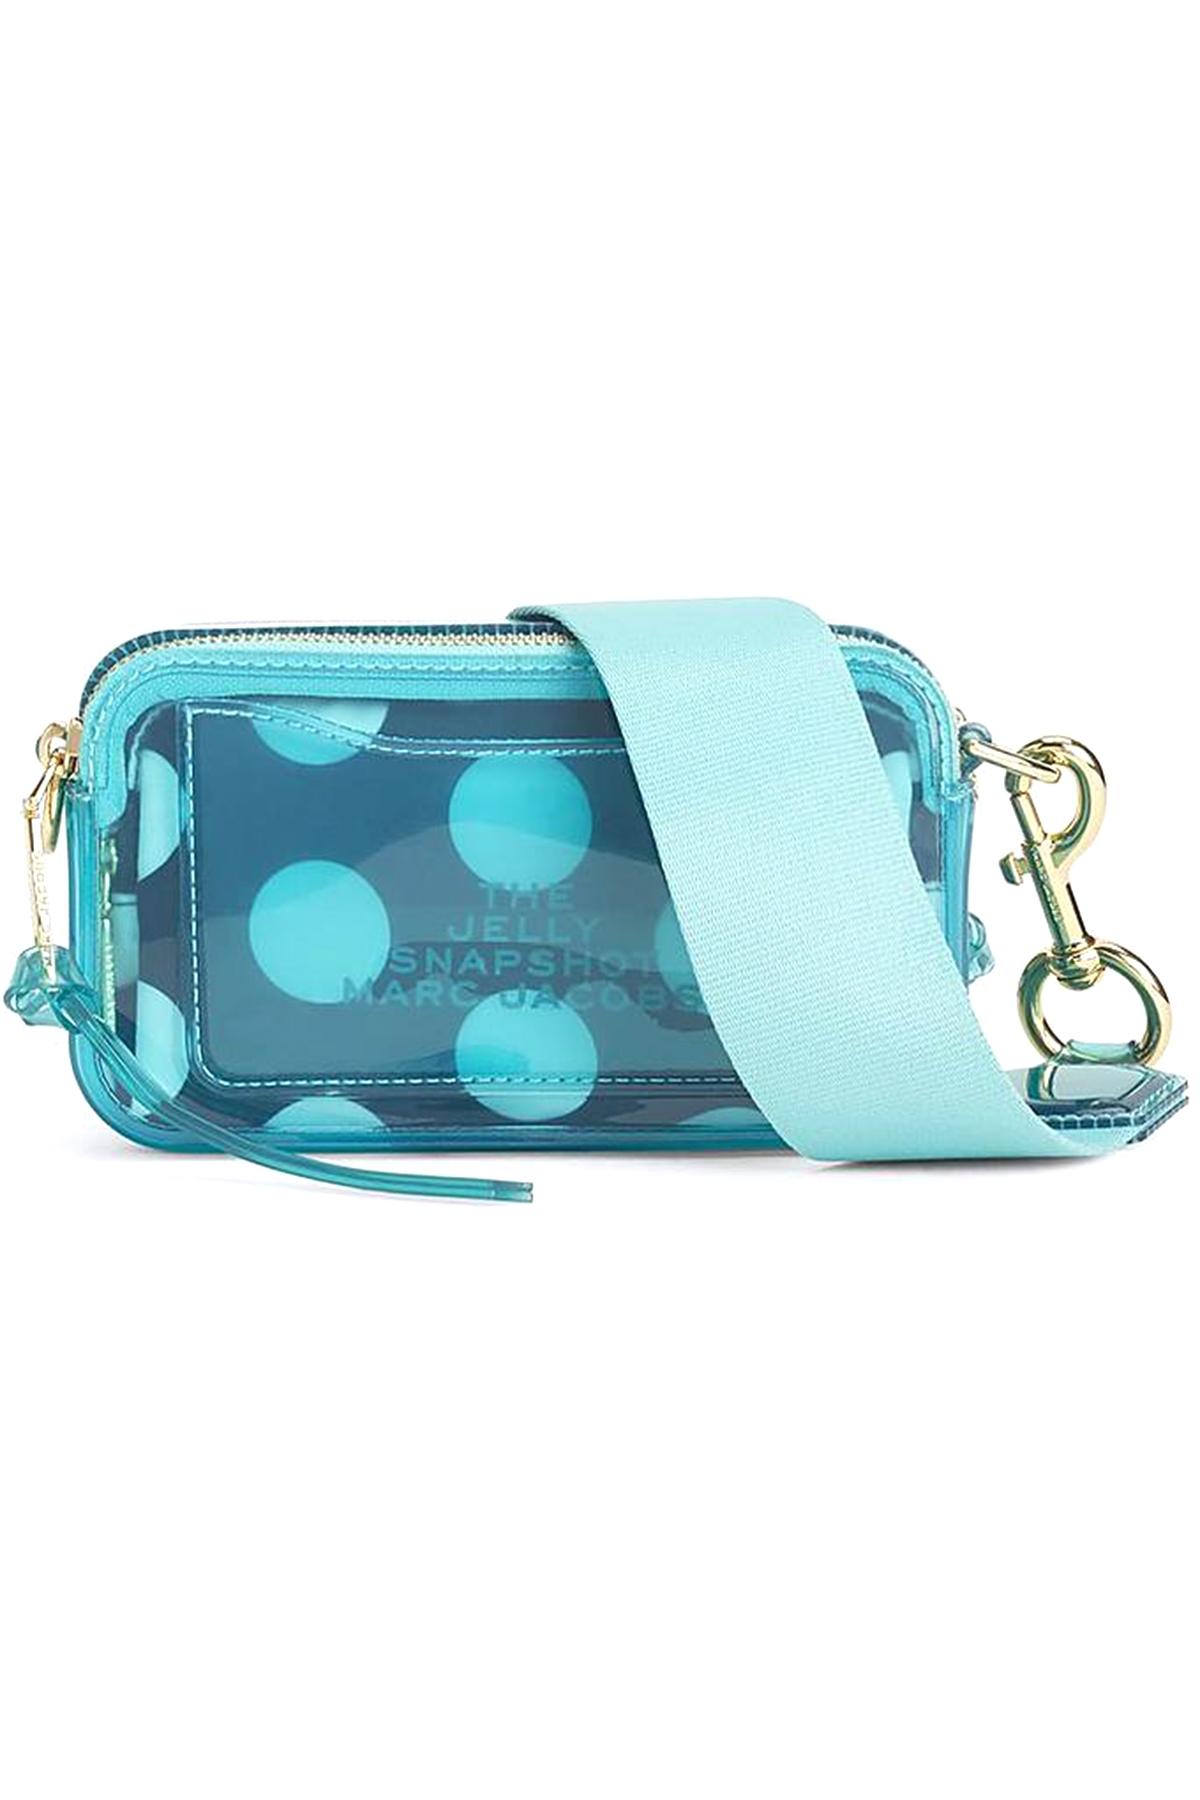 Marc Jacobs The Jelly Snapshot Crossbody Bag in Turquoise (Blue) - Lyst